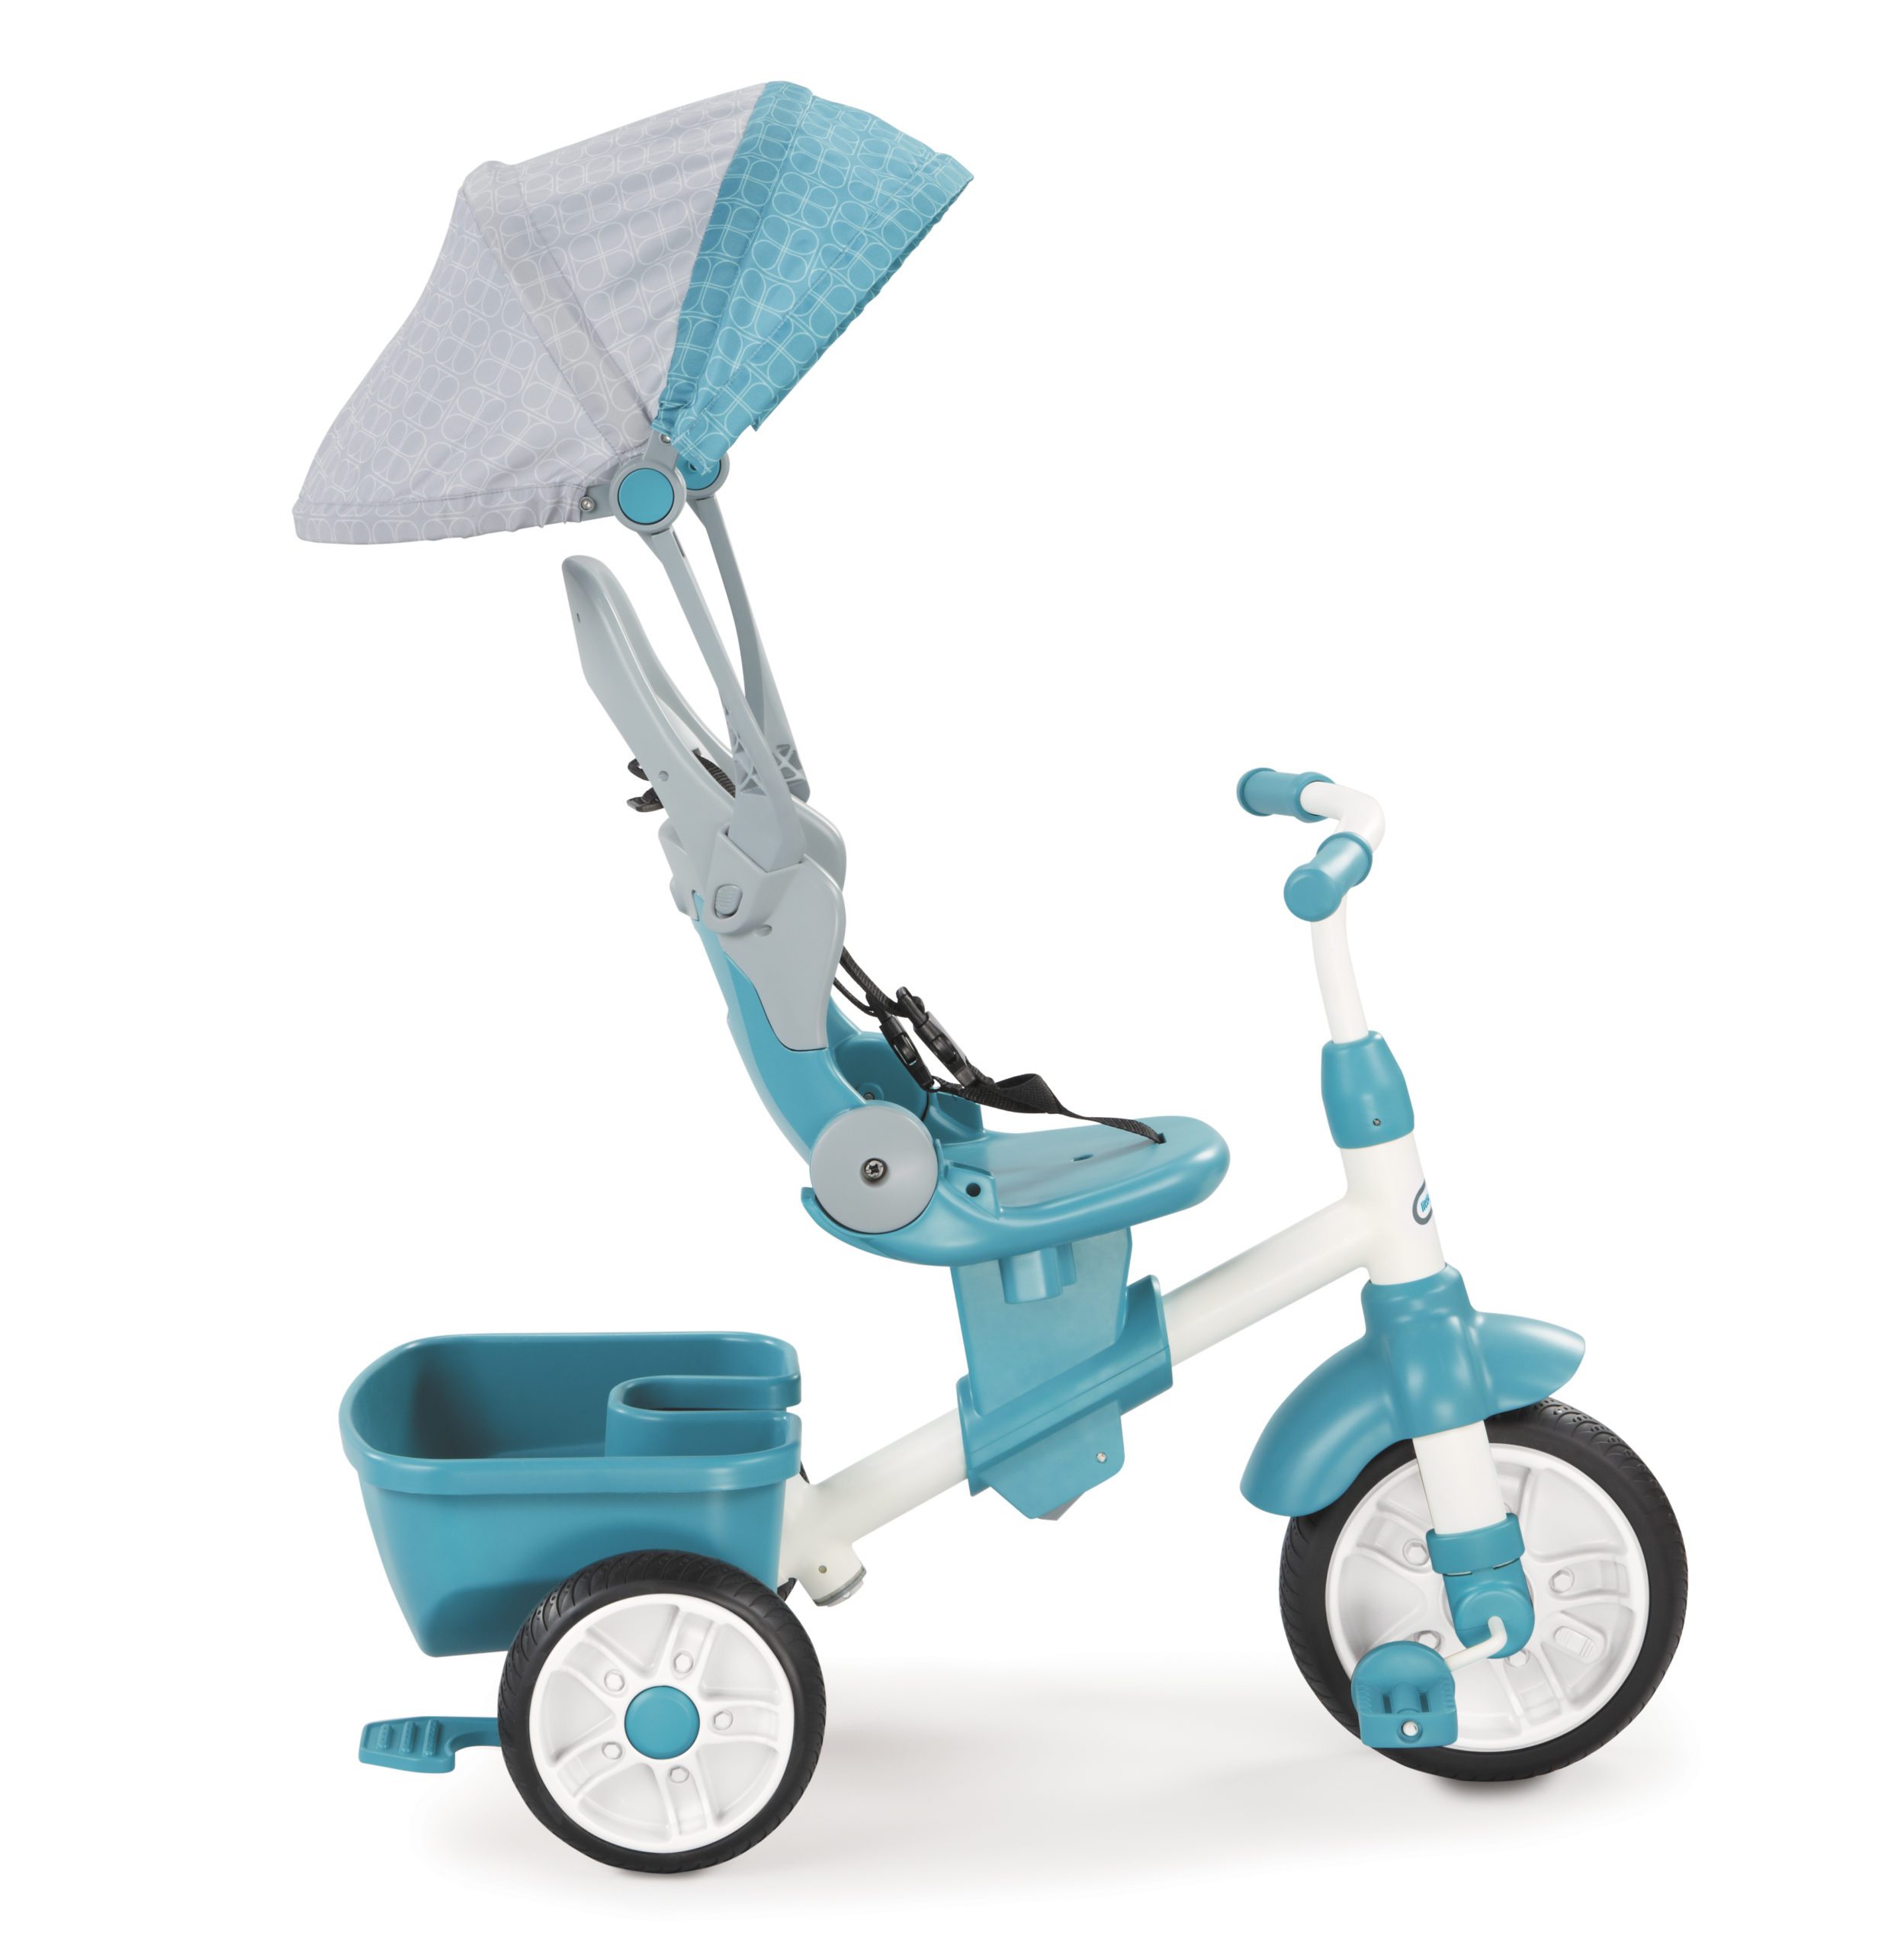 Toddler Tricycle with Safety Seat Foot Pedals,Tricycle for Children Aged 1-5 Years Old. Canopy KAW 4-in-1 Kids Tricycle Storage Basket 